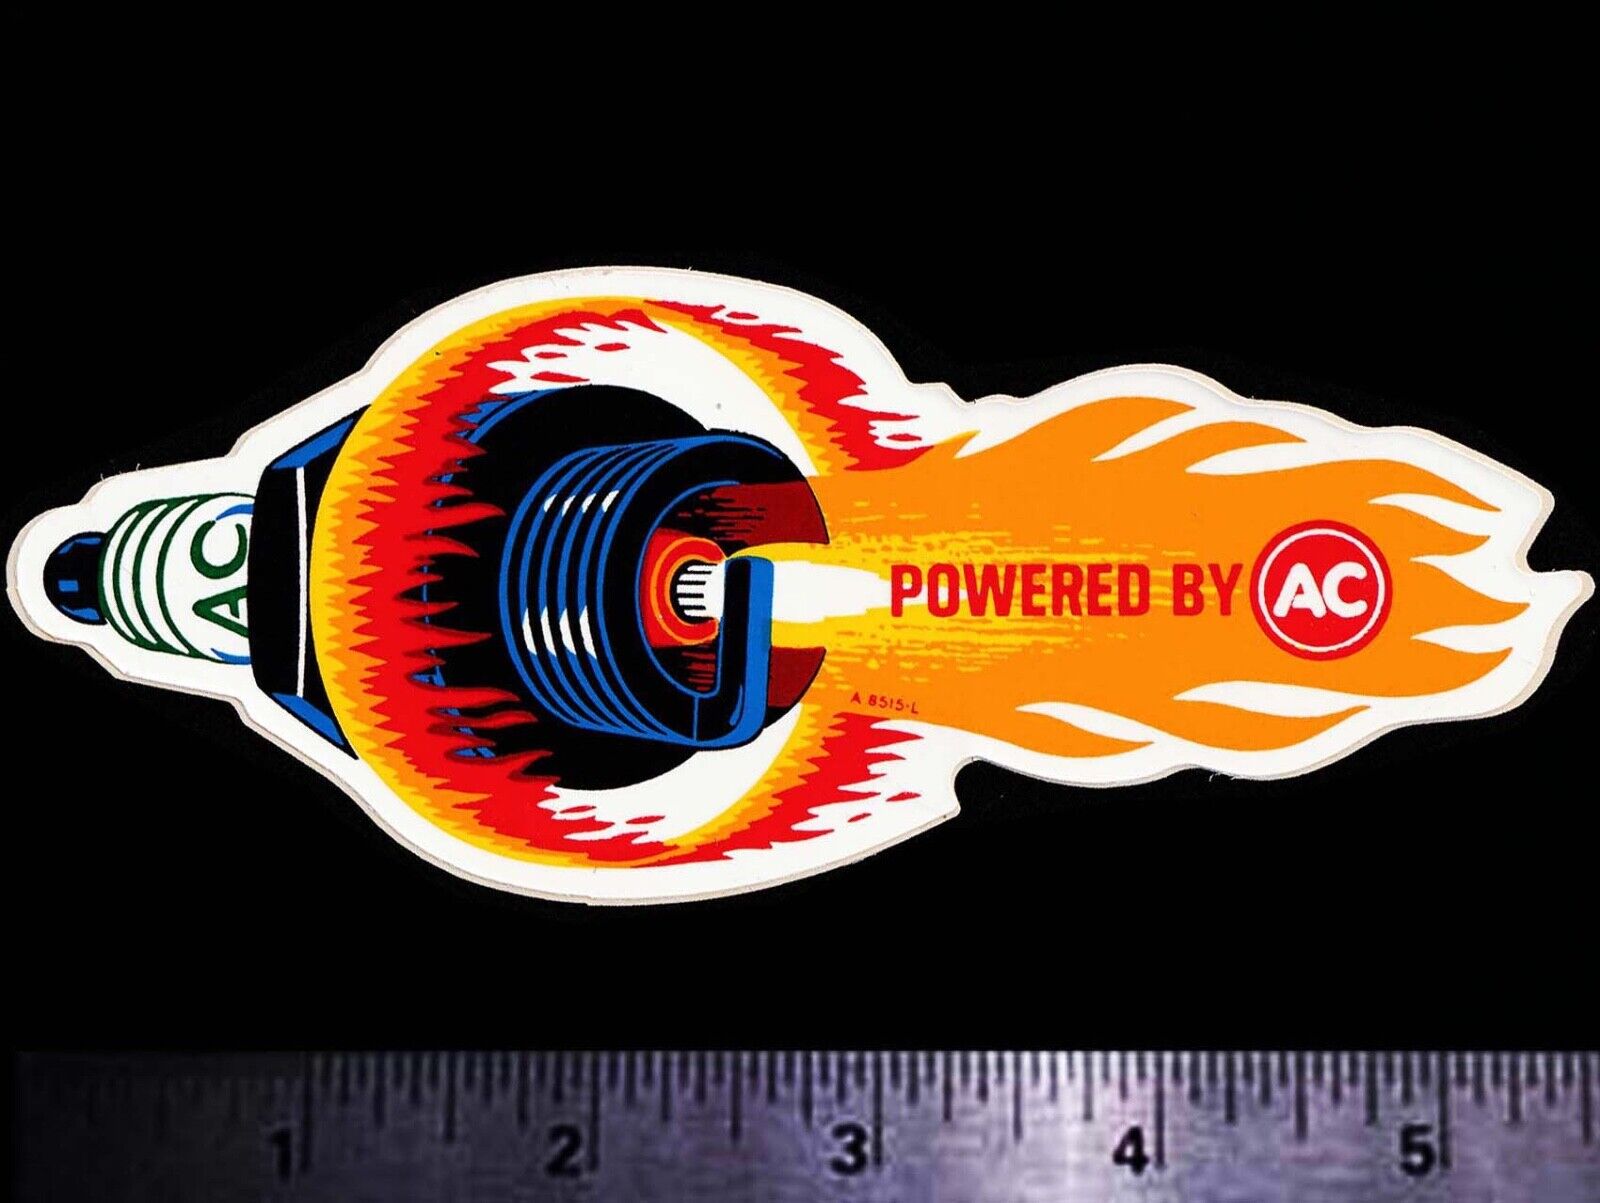 Powered By AC Spark Plugs - Original Vintage 60\'s 70s Racing Decal/Sticker Chevy